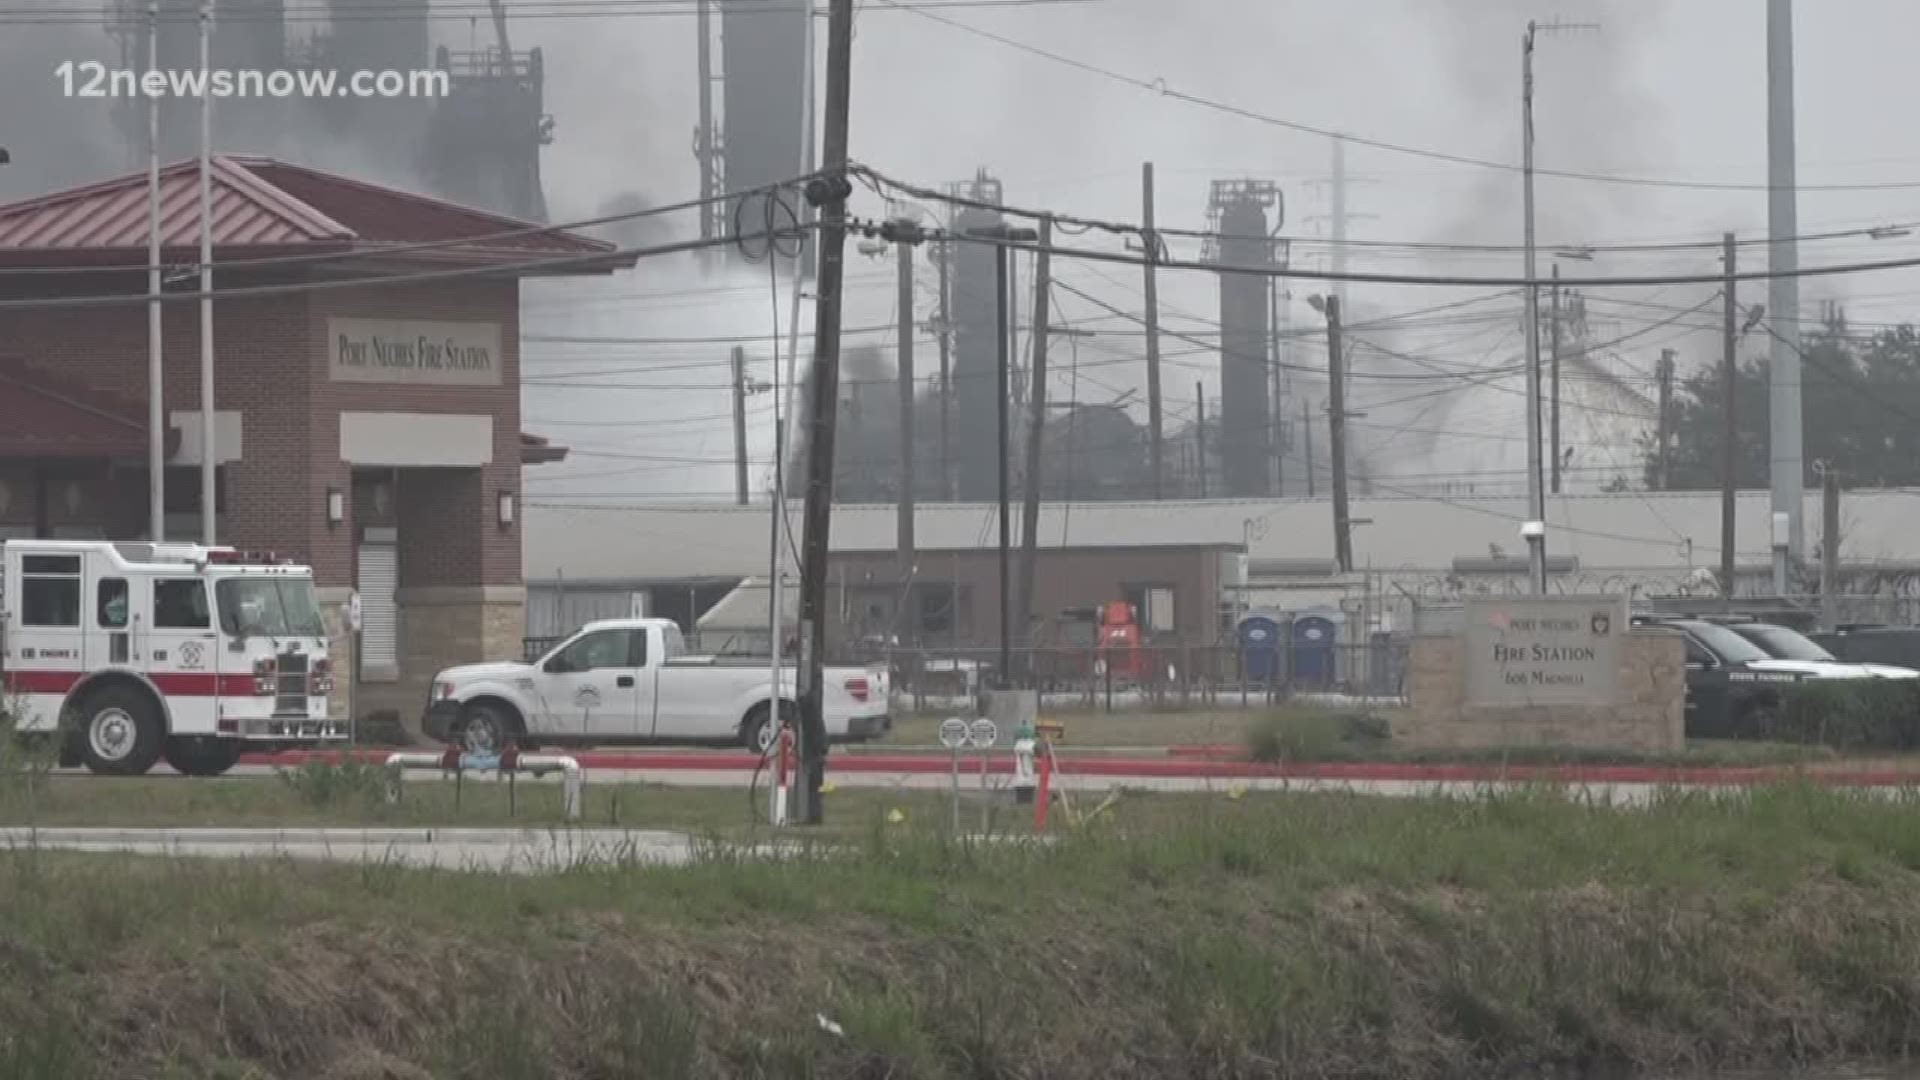 The evacuation order for many parts of Southeast Texas has been lifted, but that doesn't mean that the flame is out. More at 12newsnow.com